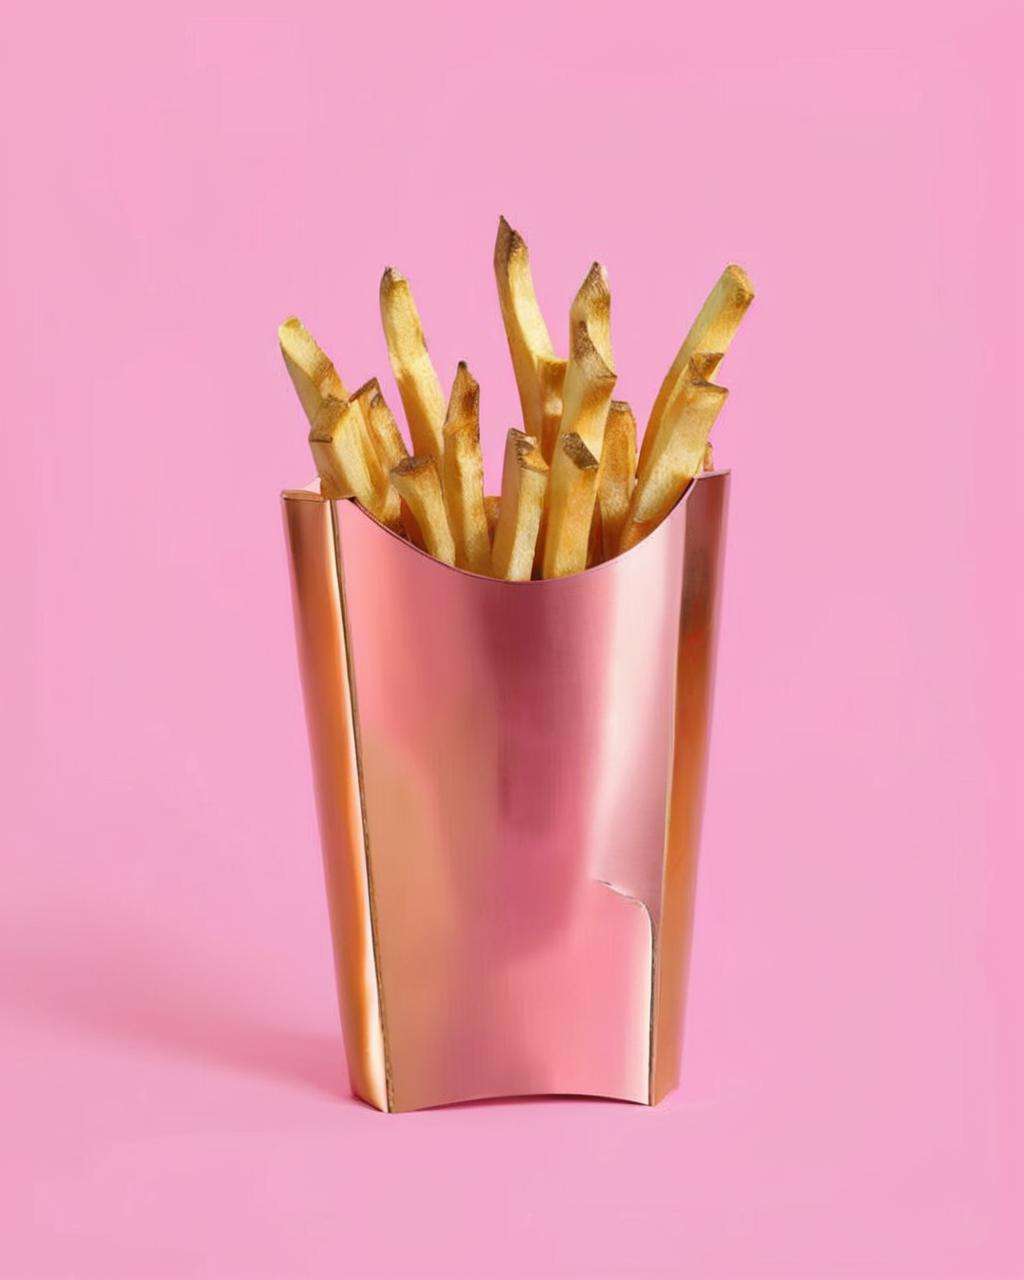 fast food's french fries shaped :1.3,  gold colored metal objects in it on a pink background with a pink background behind it, Carol Bove, aesthetic, a surrealist sculpture, aestheticism<lora:Chroma_Essence:1.0>